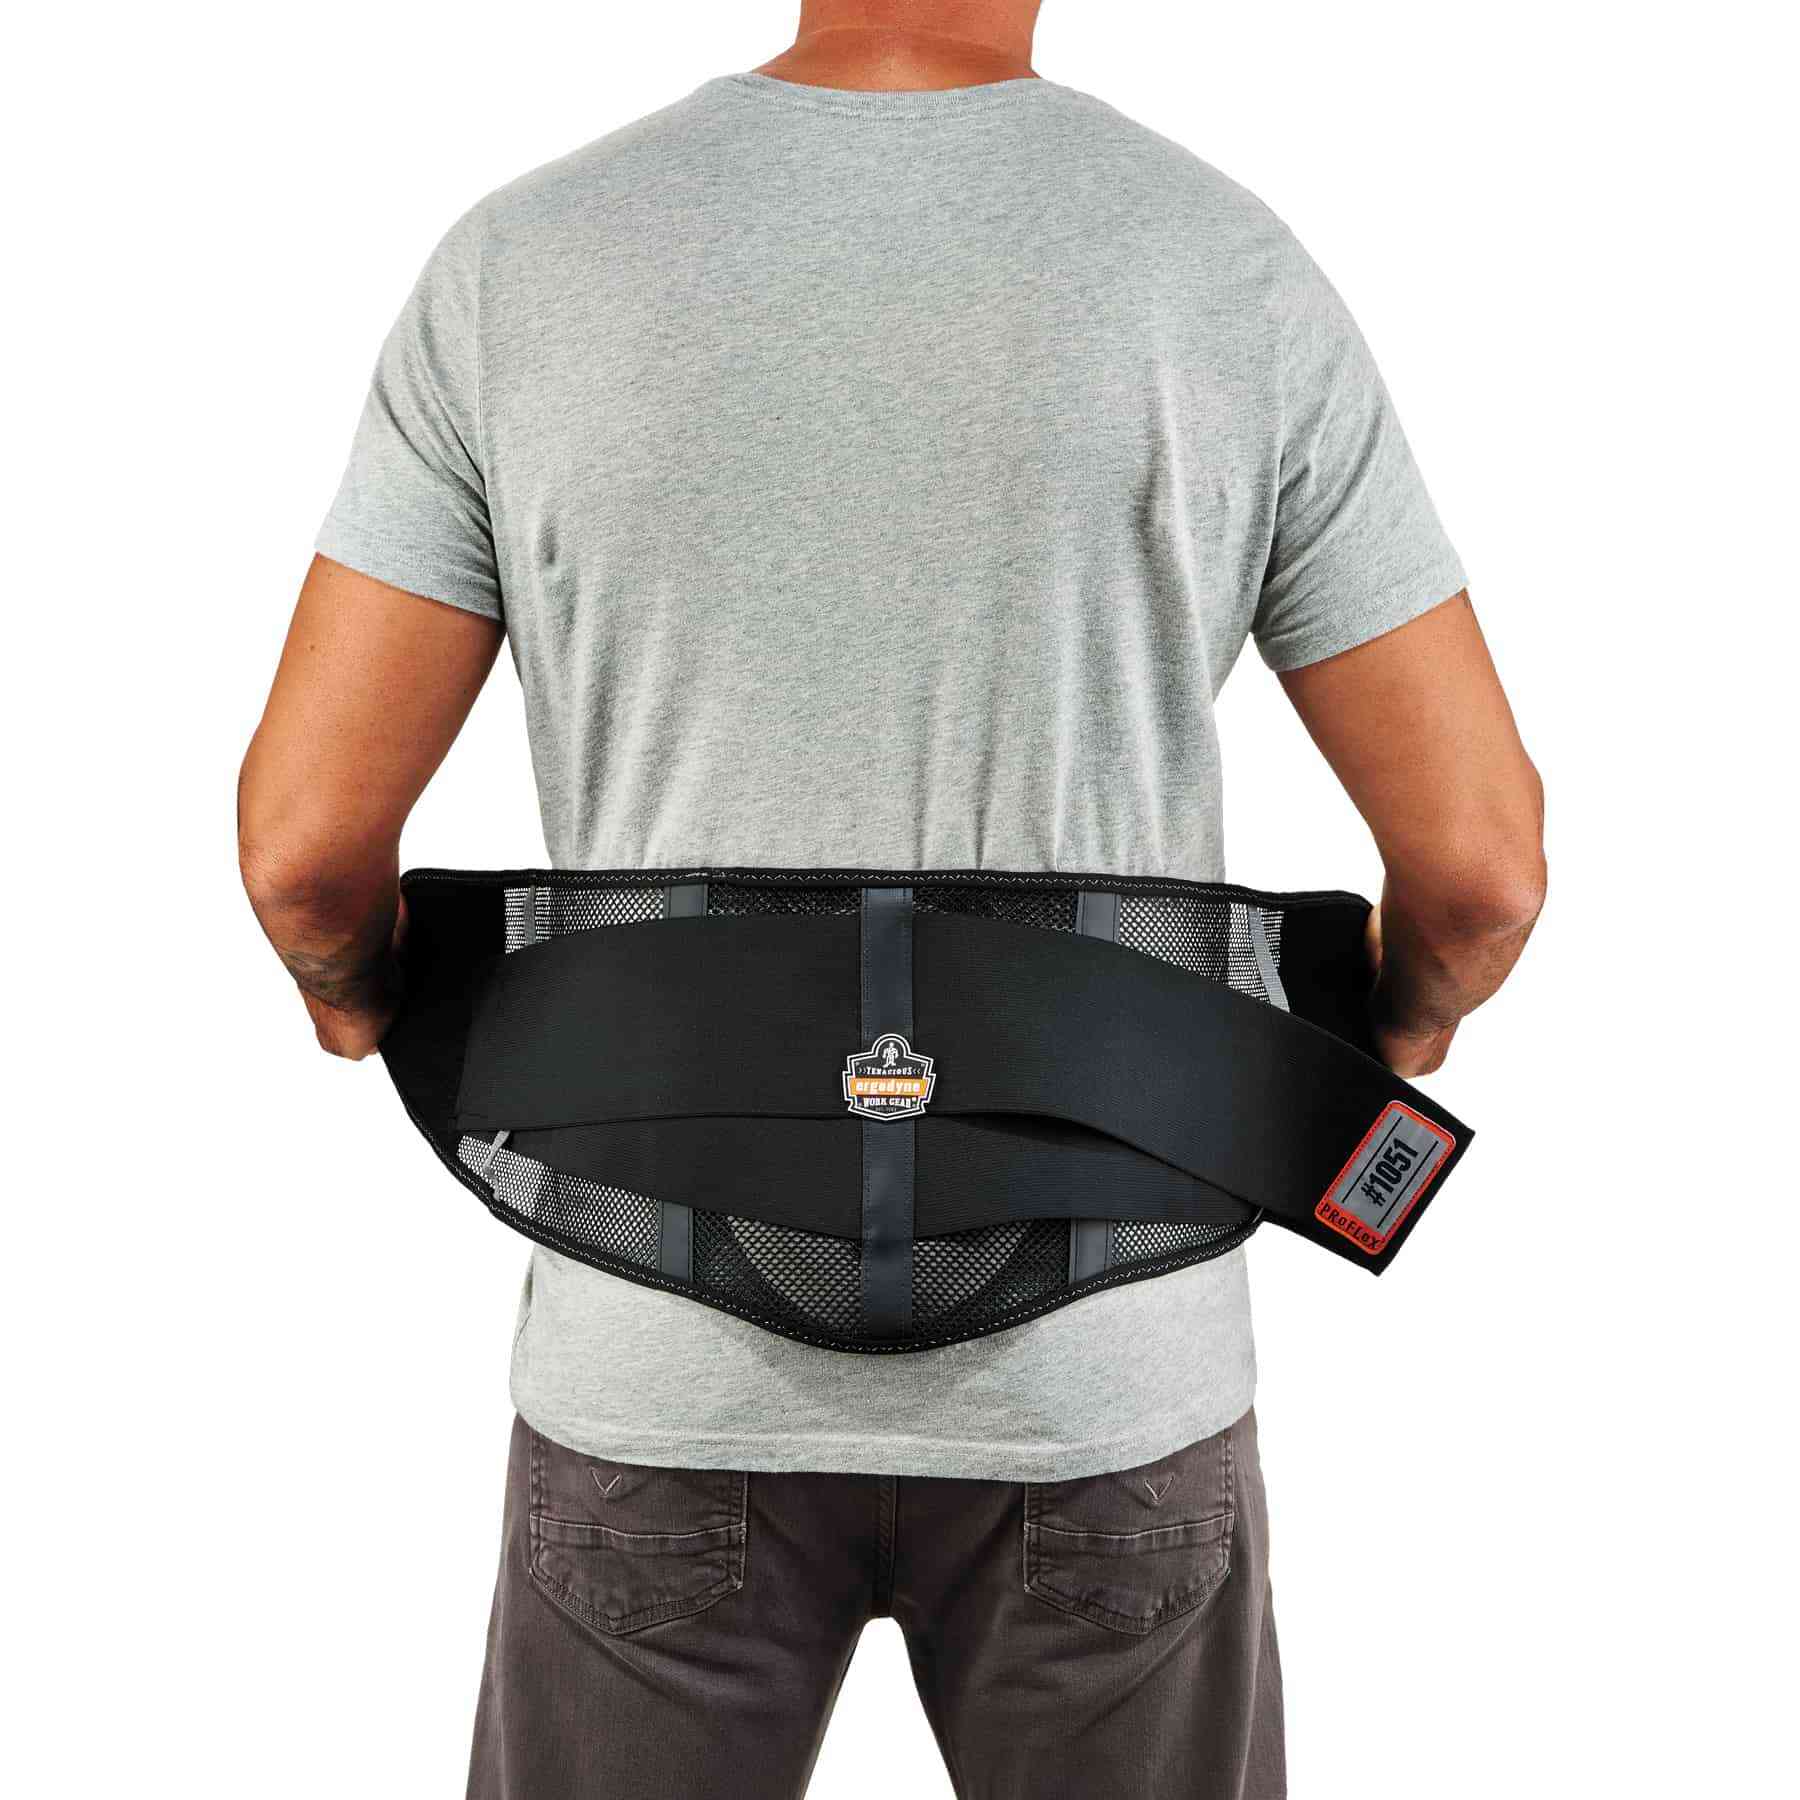 Mesh Back Support w/Lumbar Pad - Back Supports